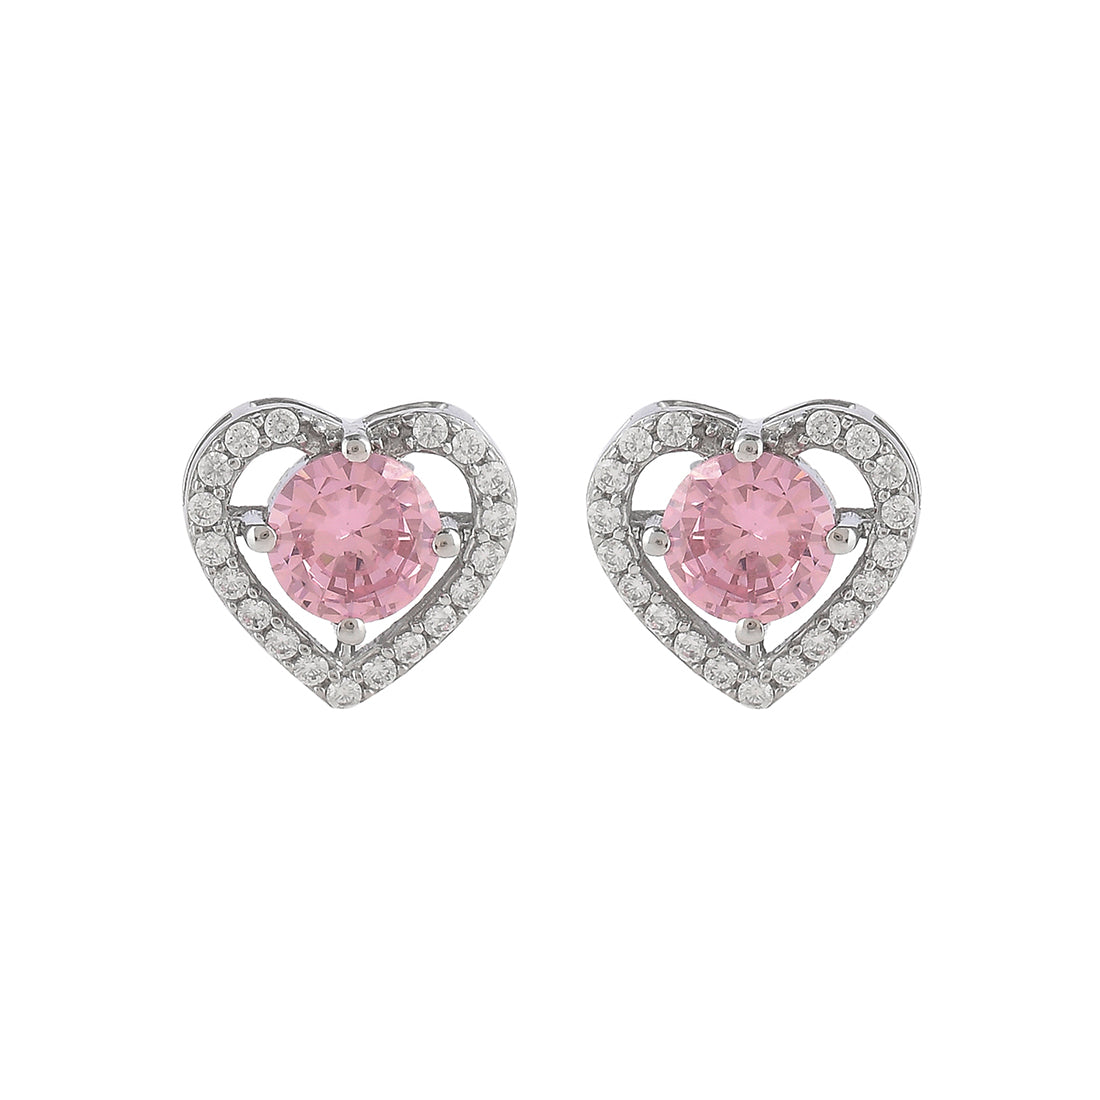 Women's Pink And Silver Cz Hearts Earrings - Voylla